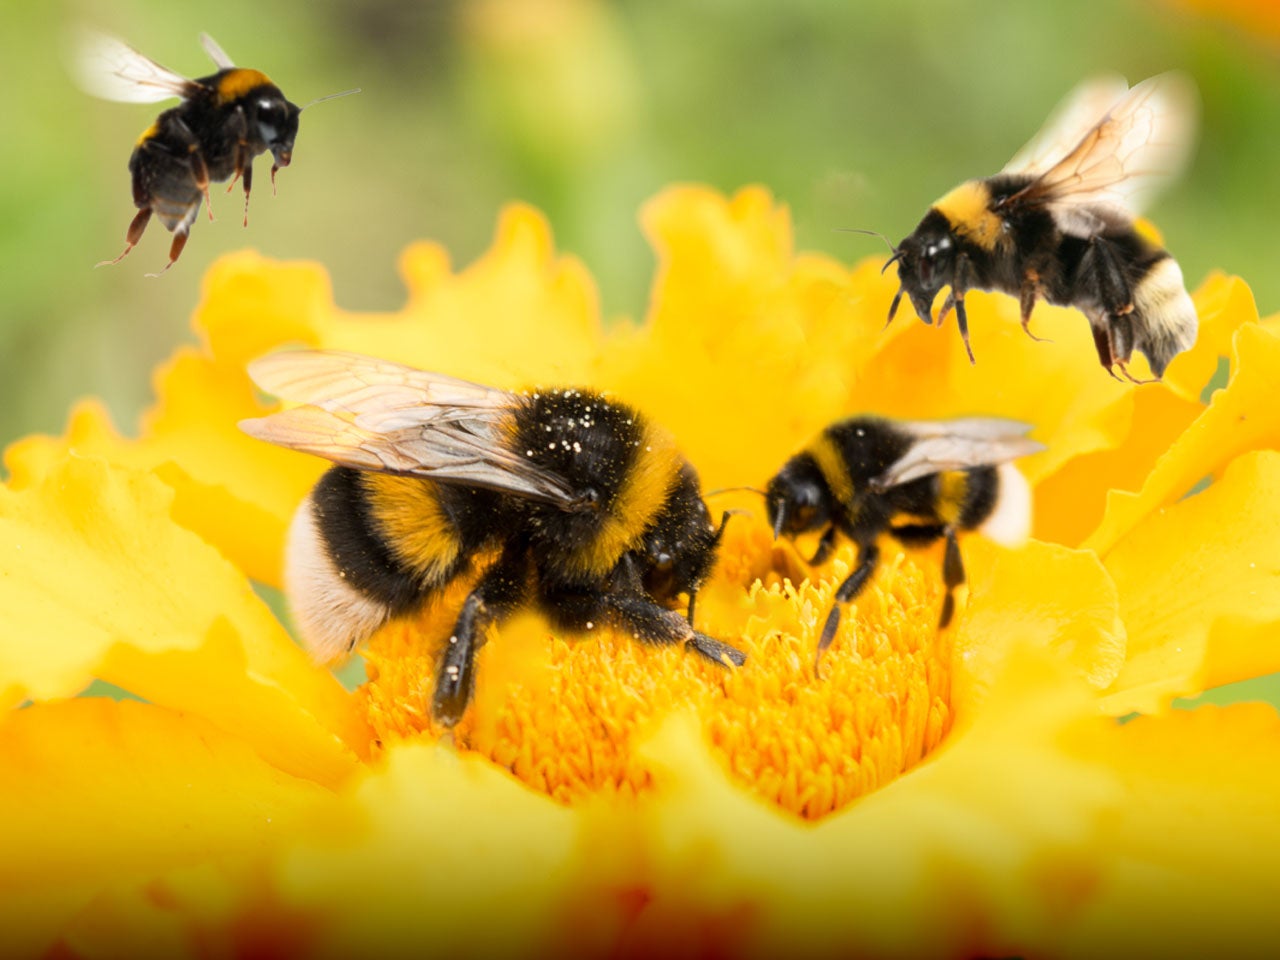 When it comes to bumblebees, does size matter?